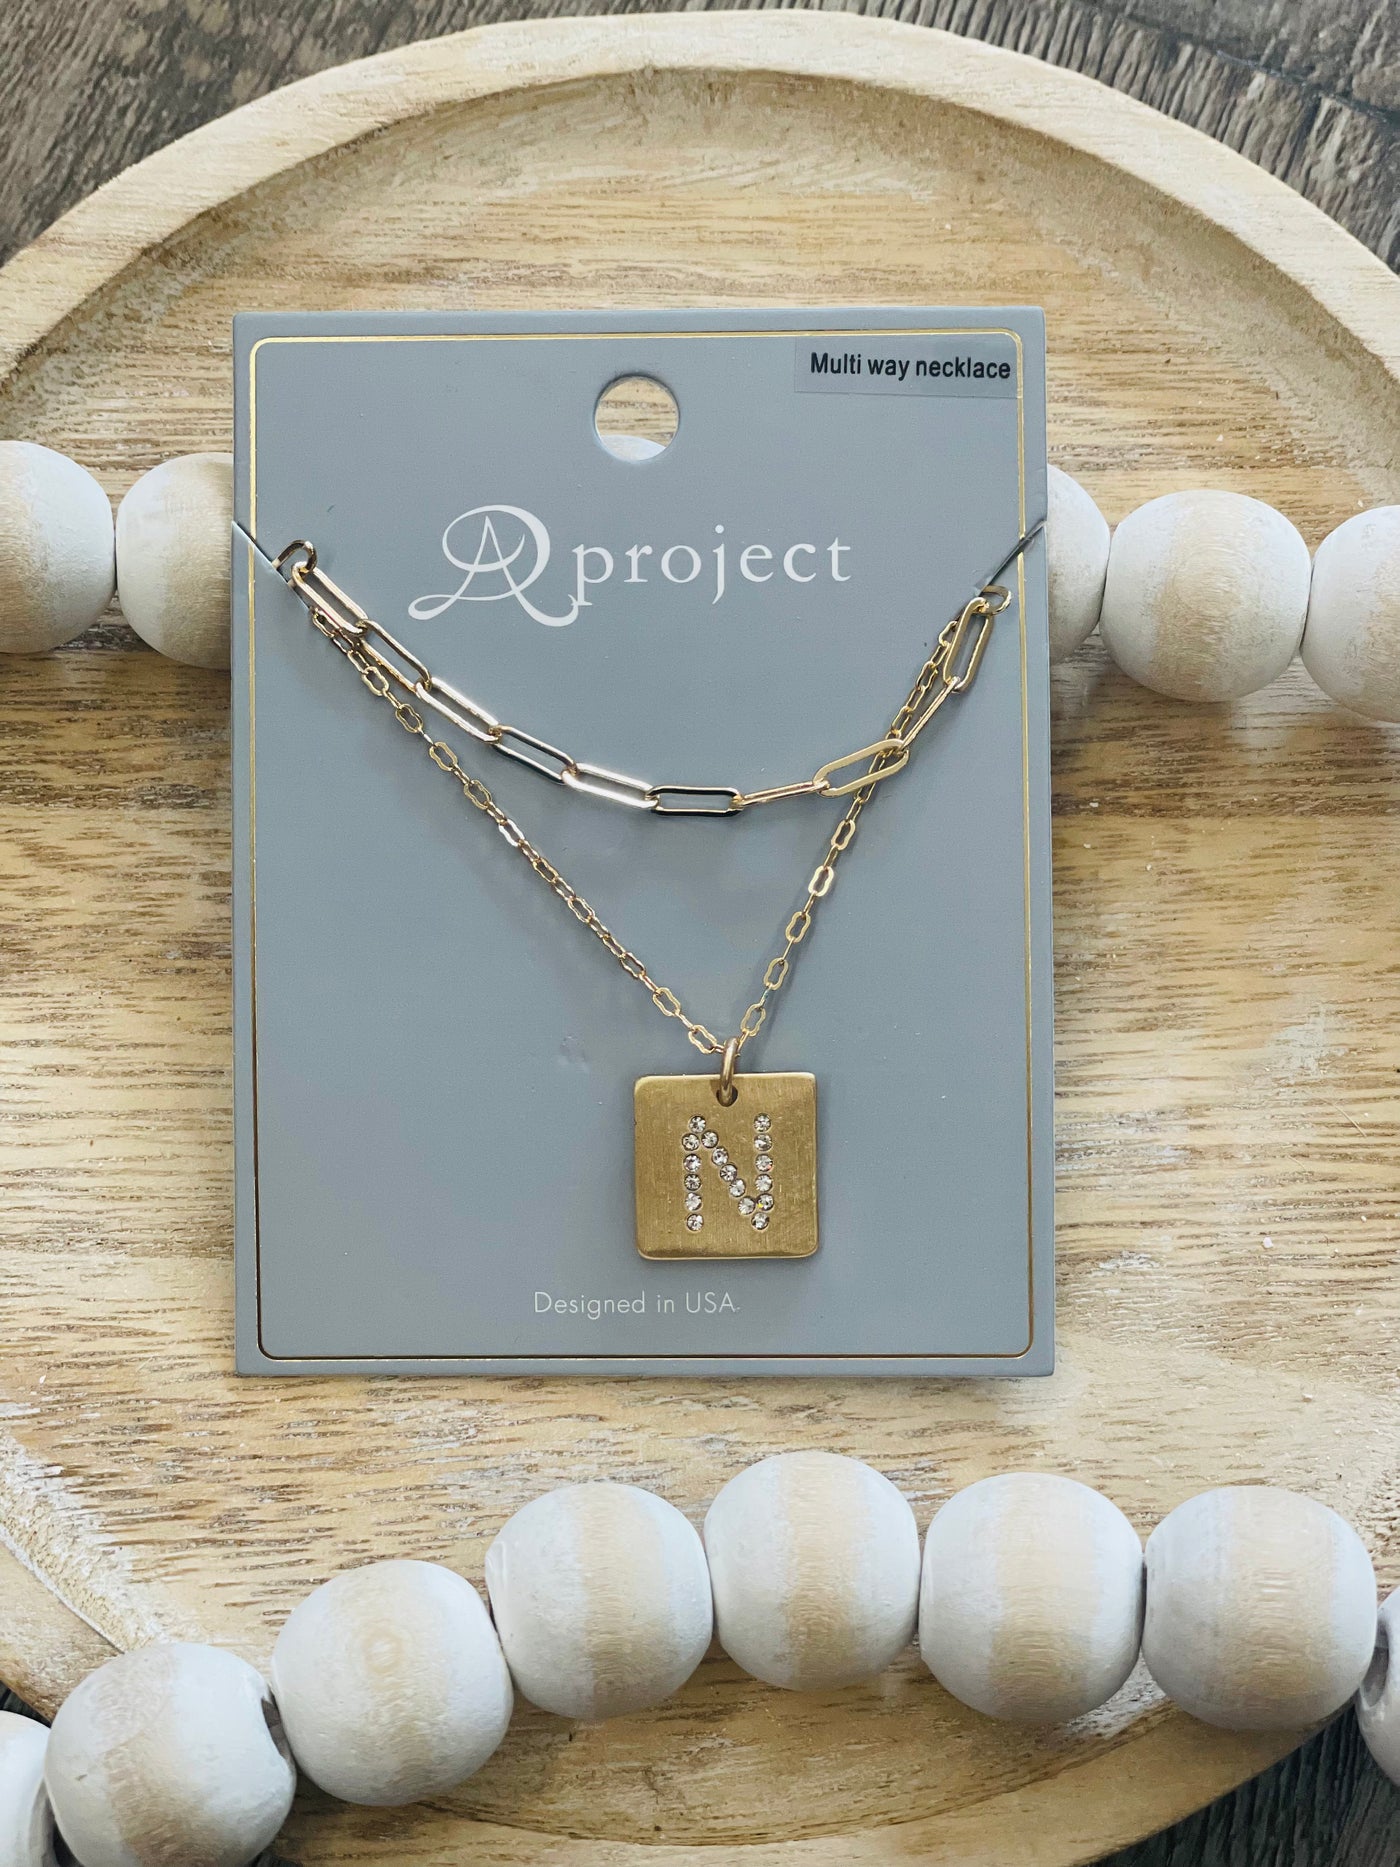 The Golden Double Layered Initial Necklace